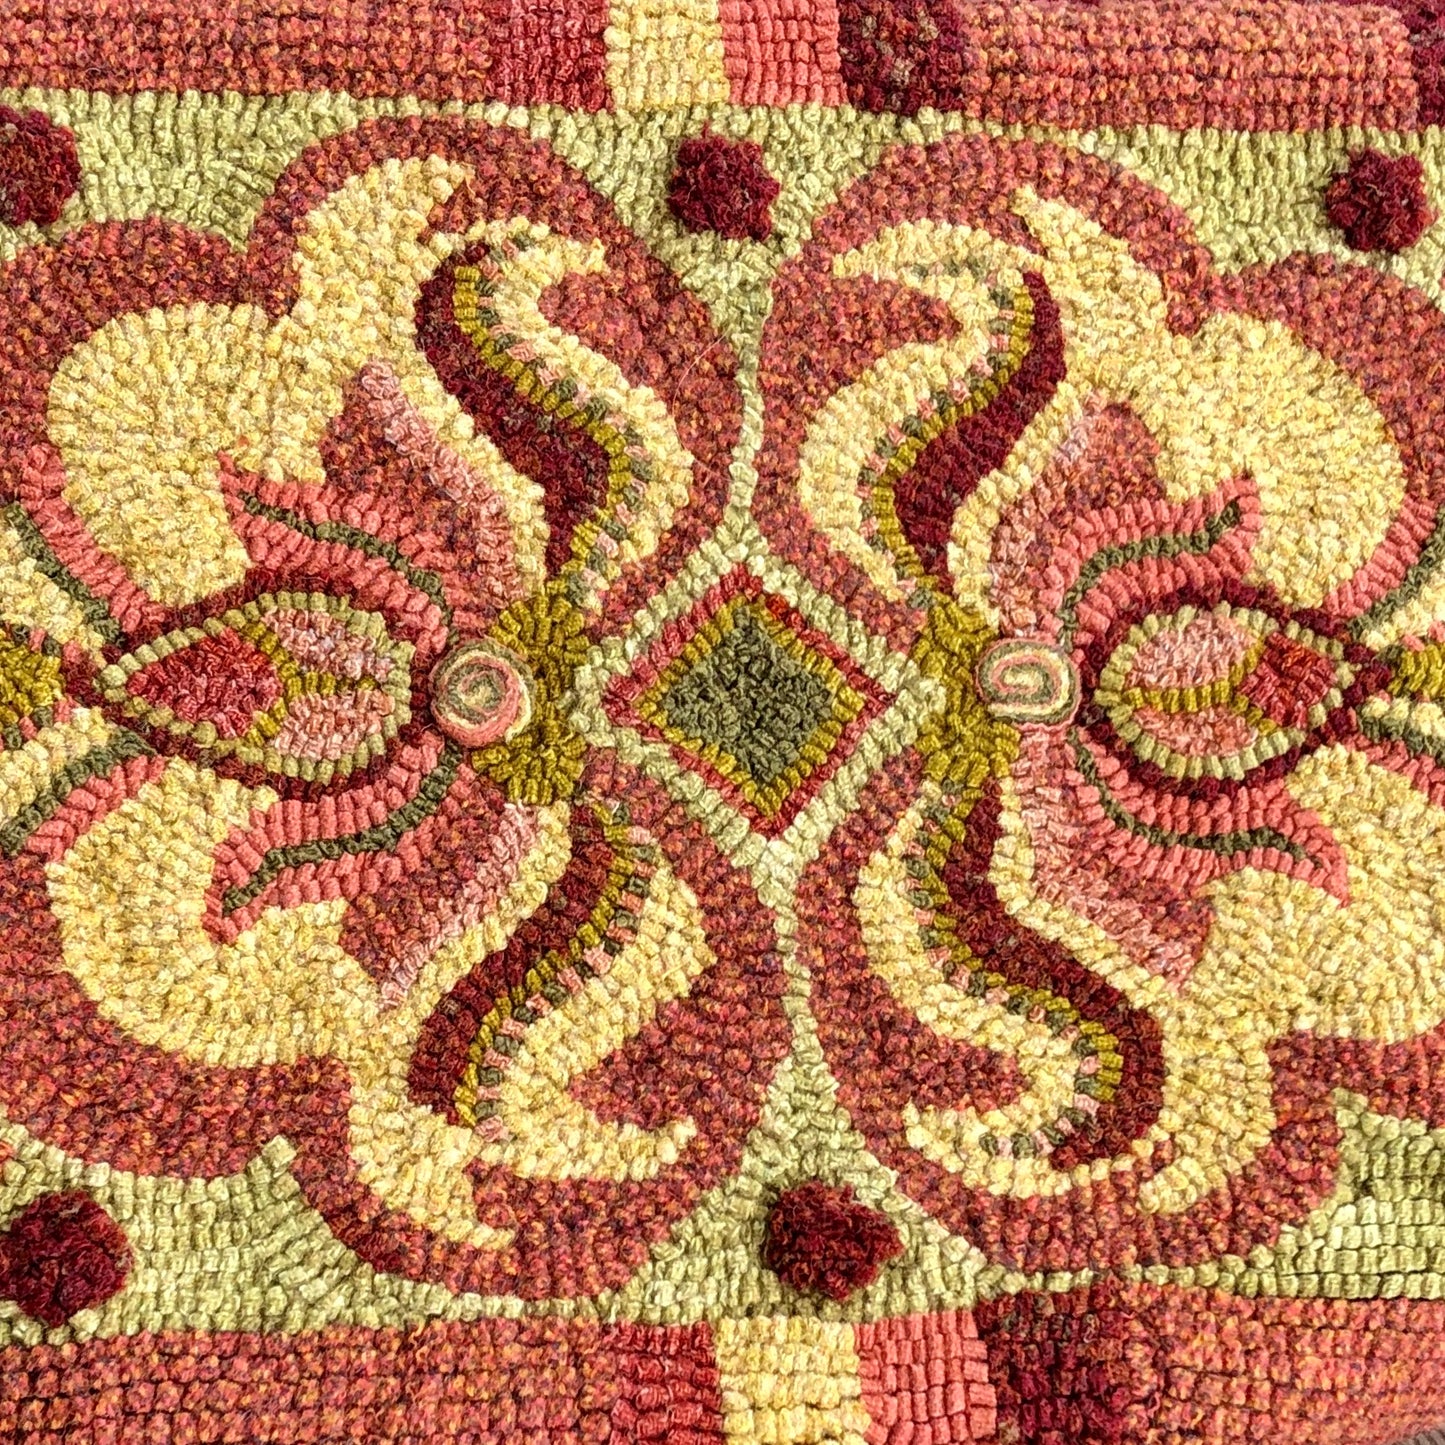 Reflecting- Paper Rug Hooking or Rug Punch Needle Pattern by Orphaned Wool. This paper pattern was designed to be enlarged, giving you the artist the ability to choose the size pattern you want to create. This pattern also has two color guides that are part of the pattern purchase.. Spring and Winter - Spring is a lighter color palette and winter is a warmer color palette.